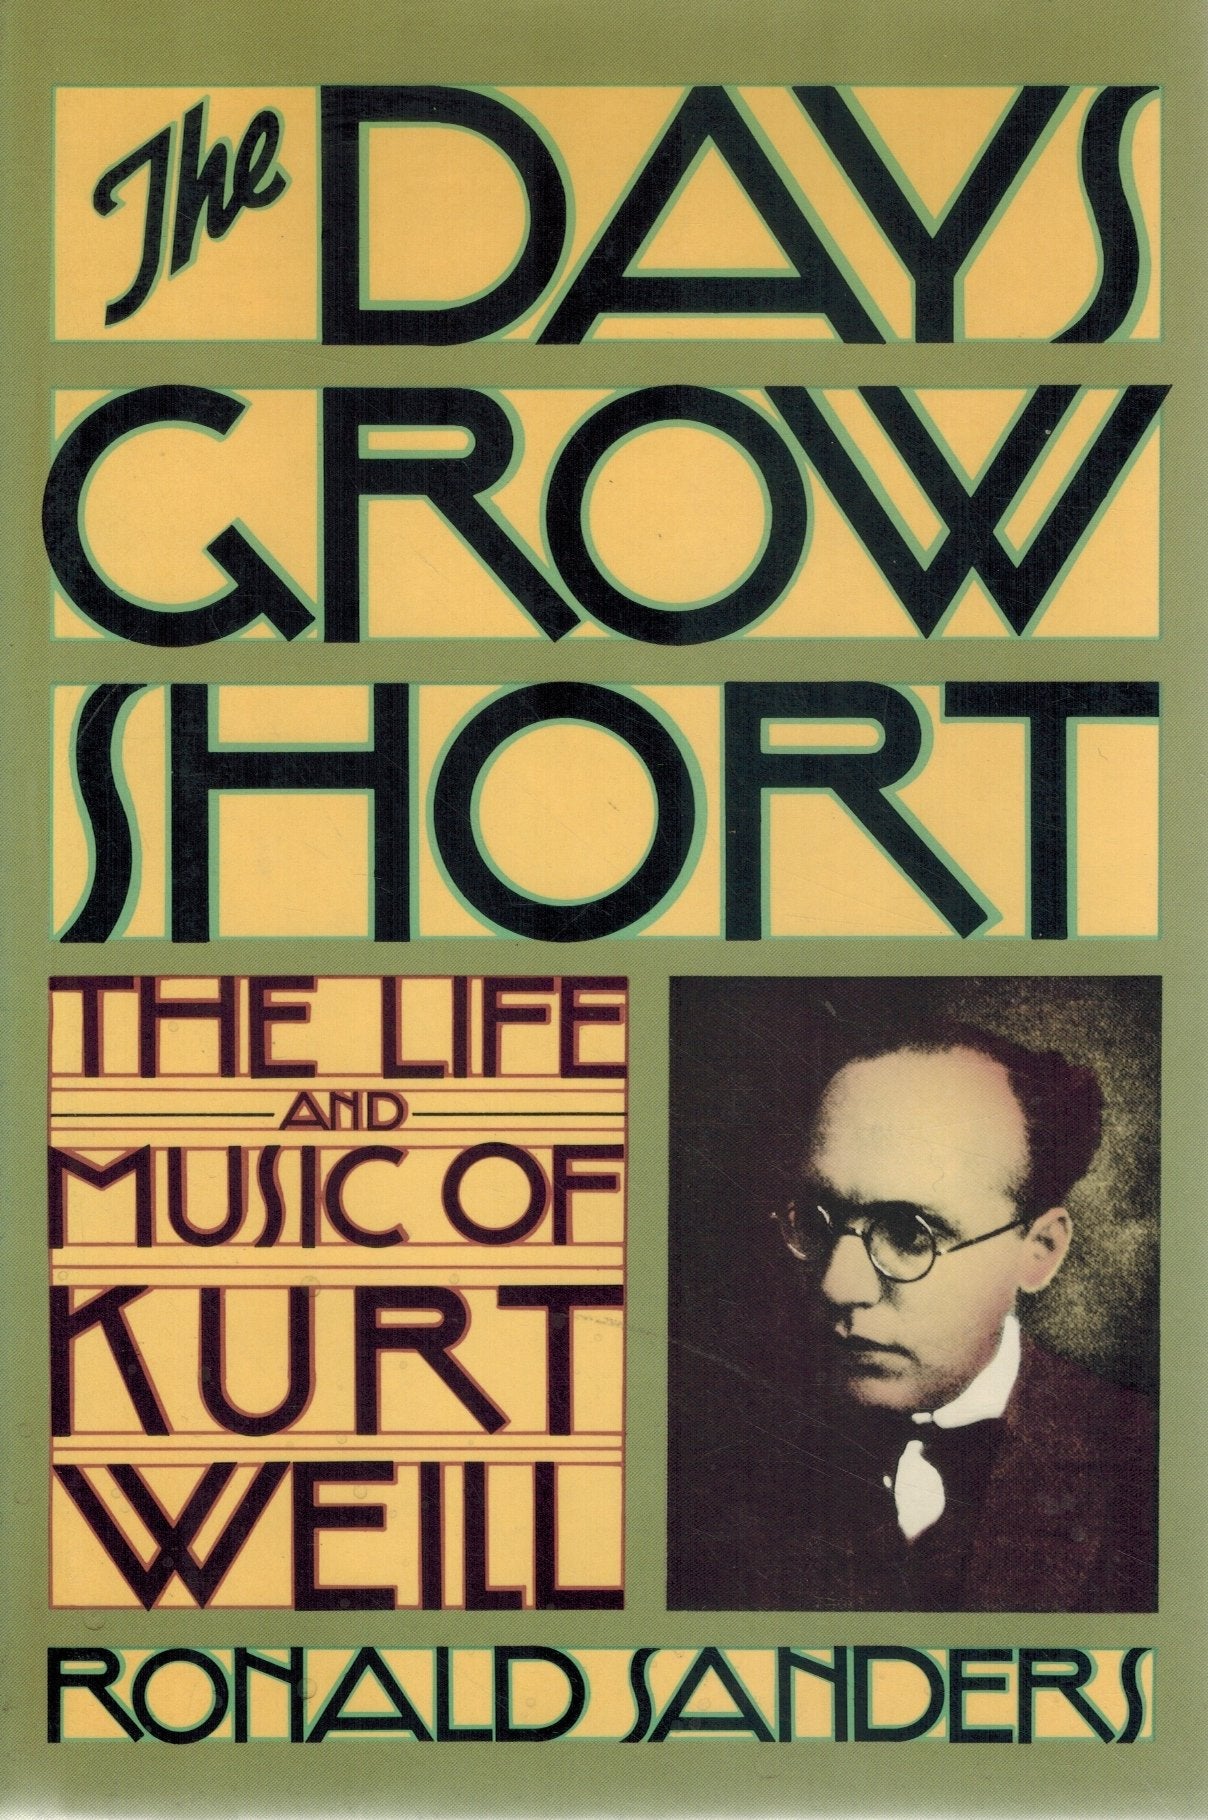 THE DAYS GROW SHORT The Life and Music of Kurt Weill  by Sanders, Ronald